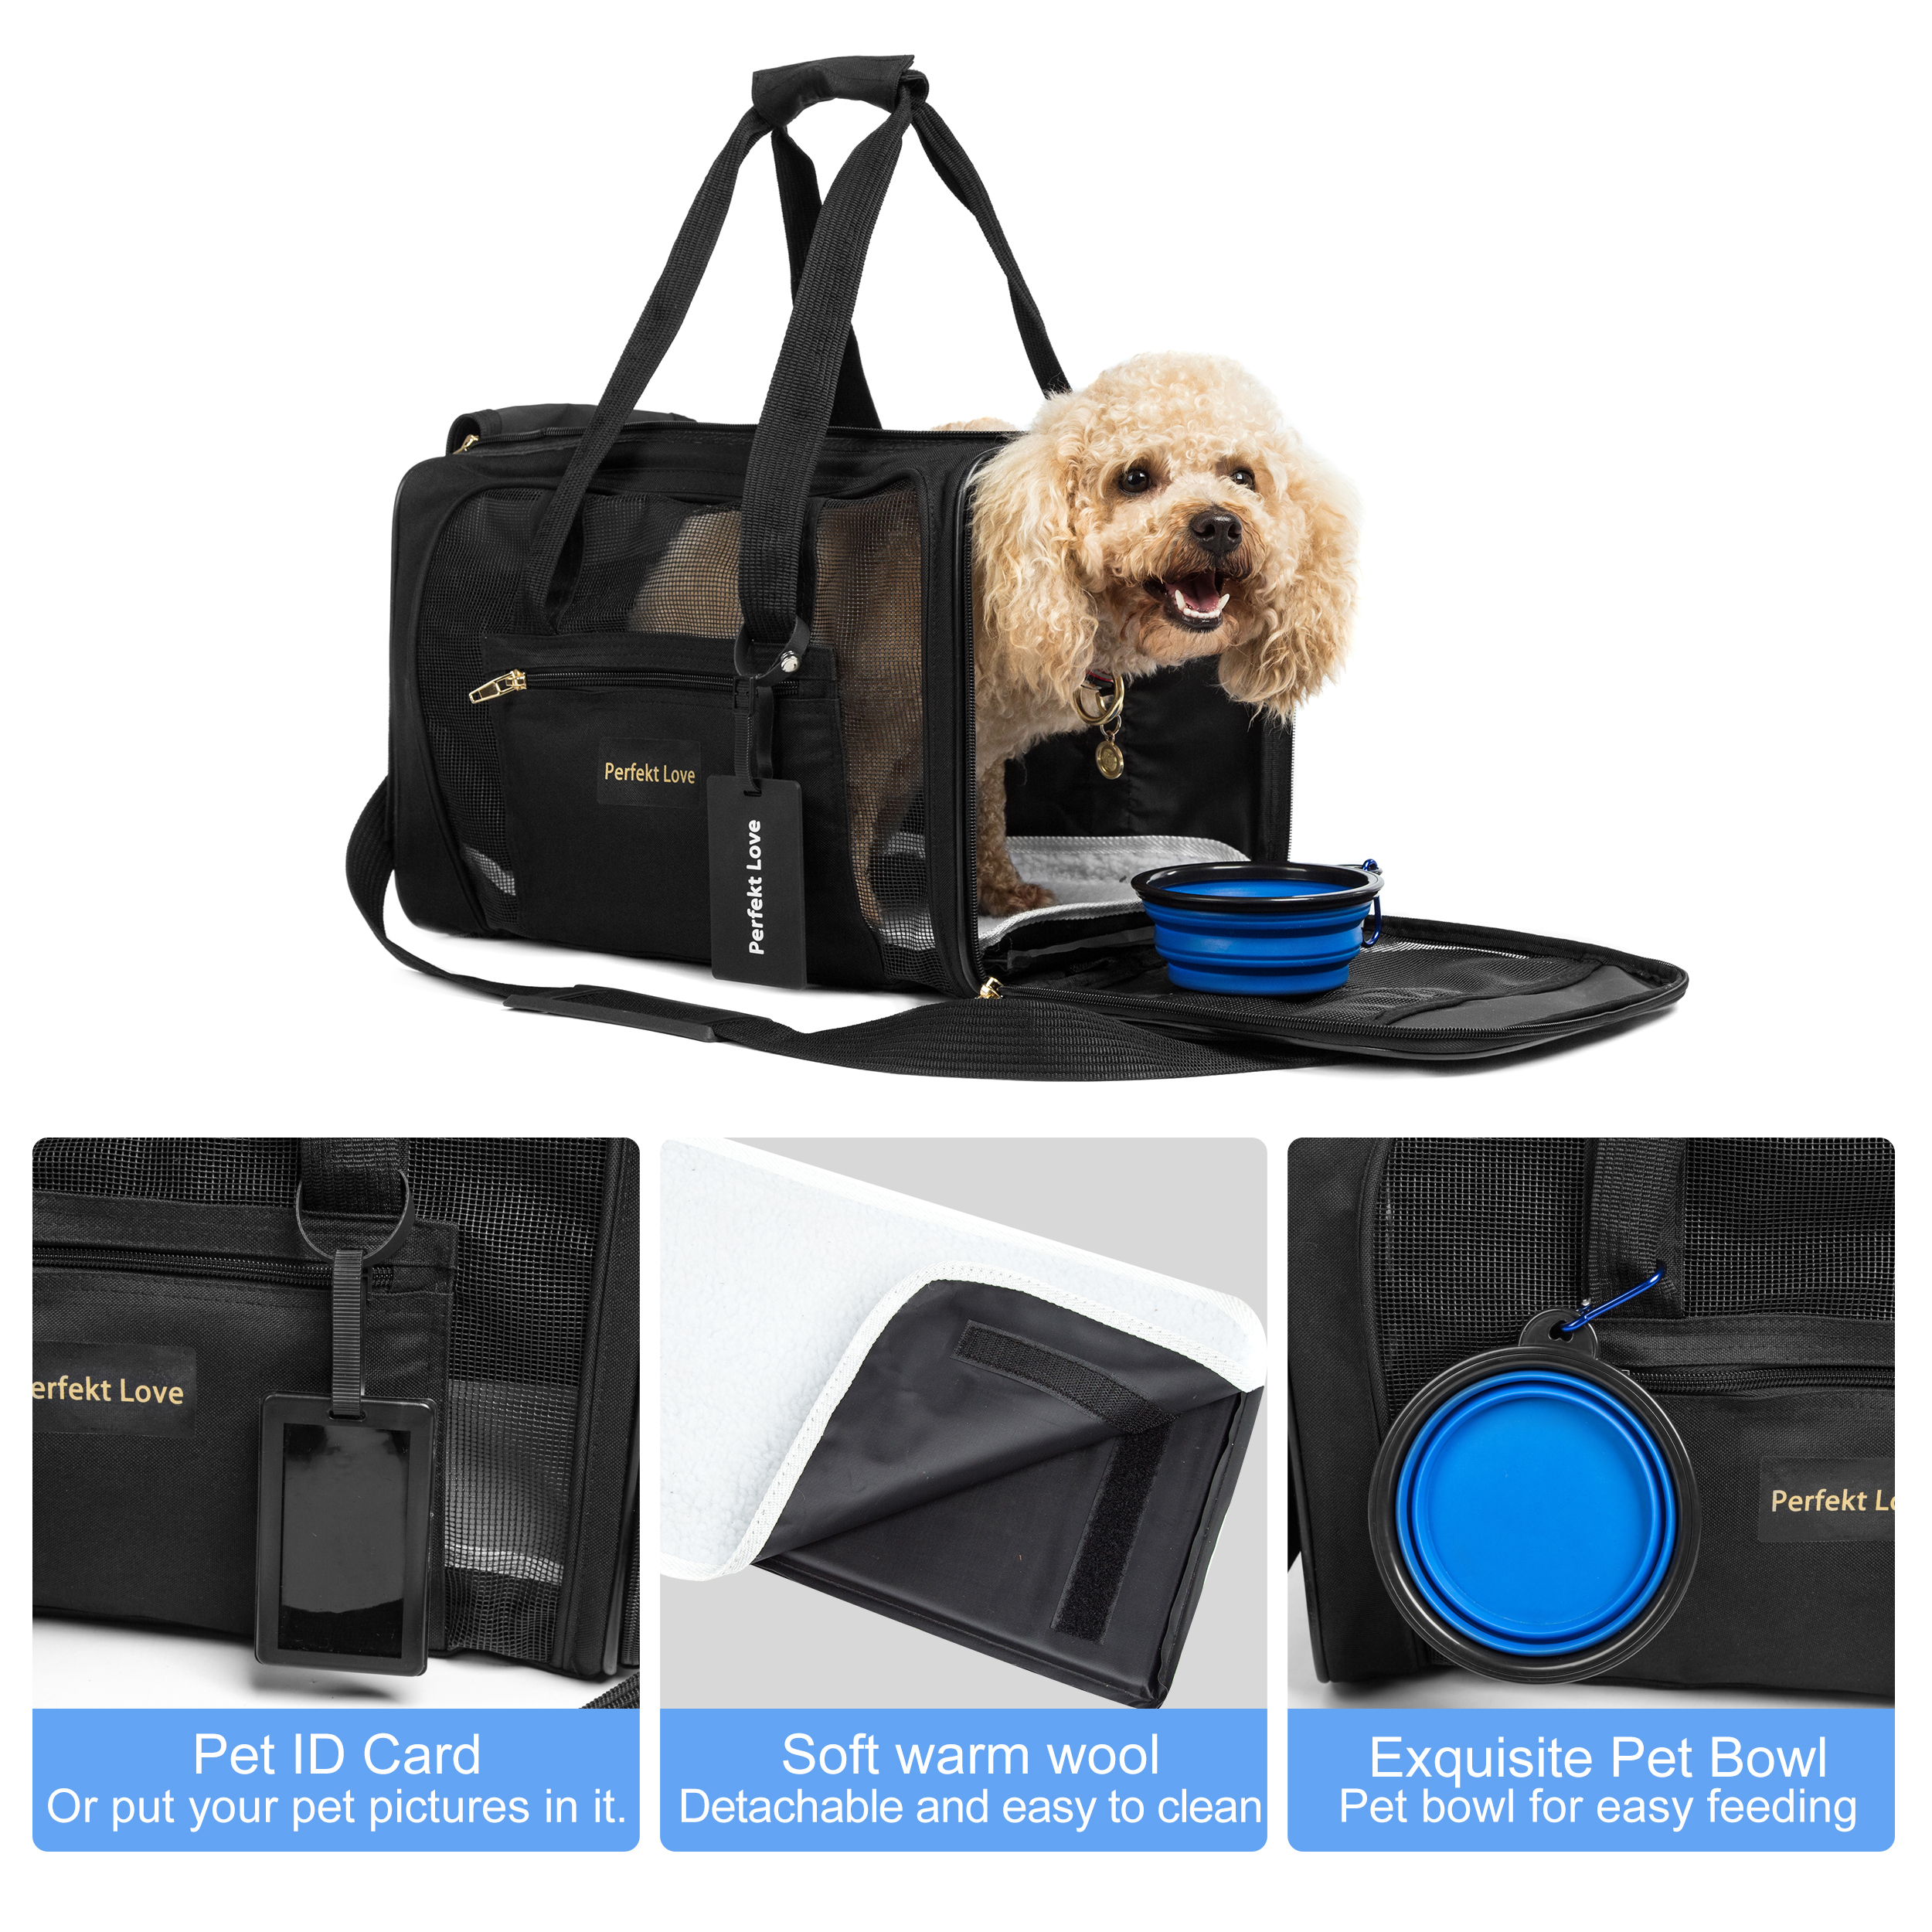 Portable Cat Carrier Folding Dog Soft Sided Travel Carrier Bag with Pet Pad Pet Carrier Airline Approved for Small Cats